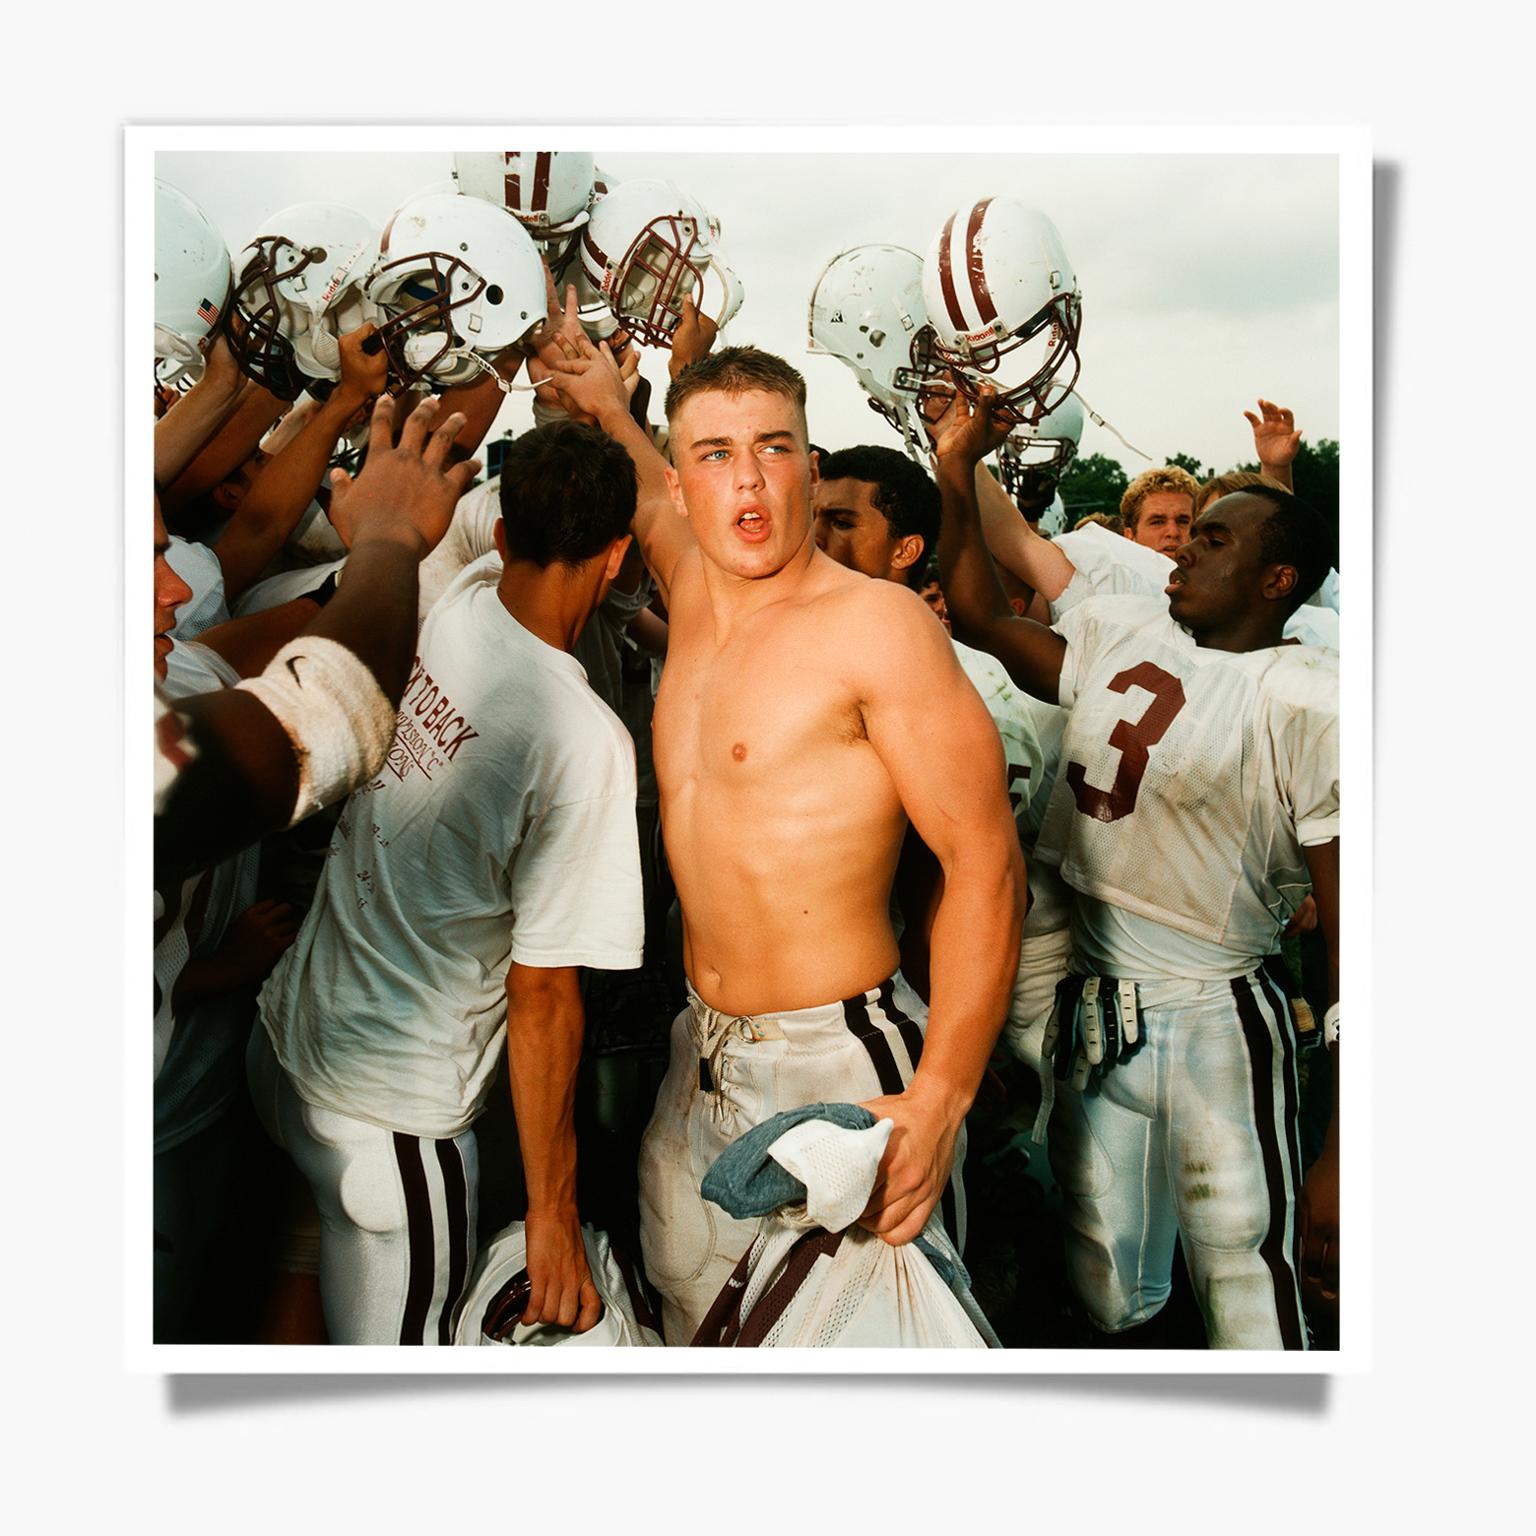 Untitled (Football no. 16) - Photograph by Brian Finke